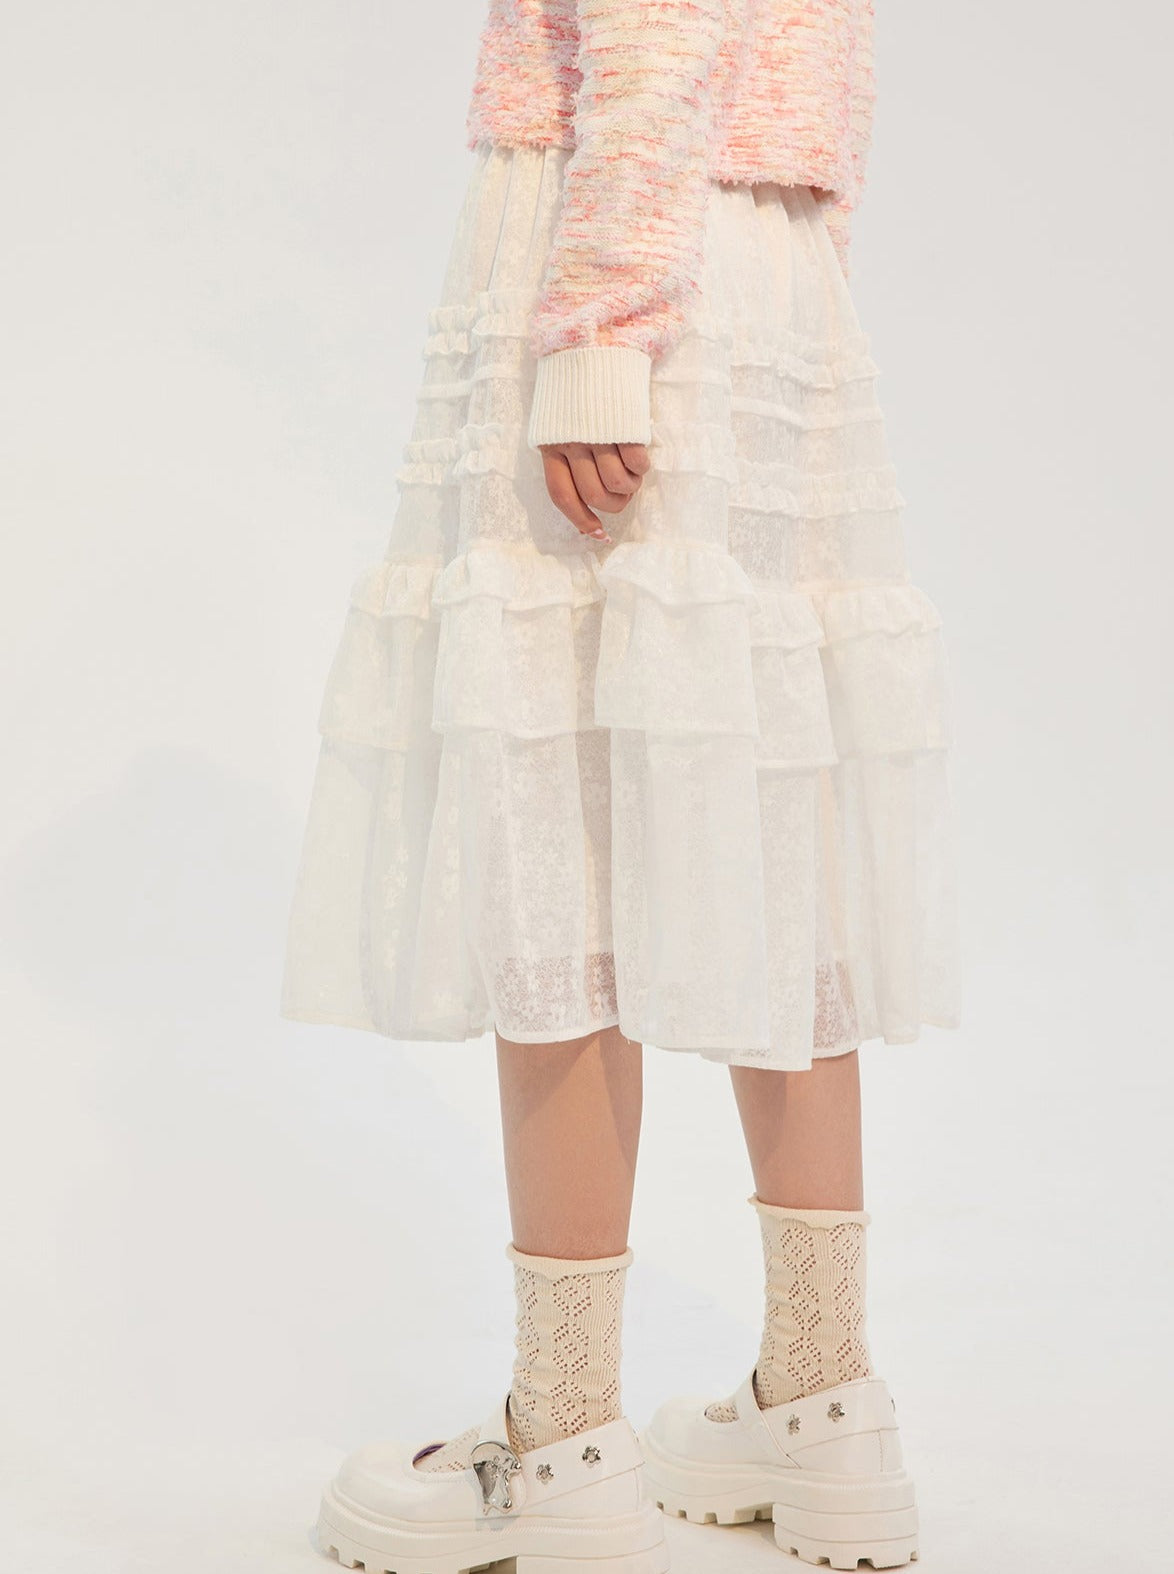 French Pastoral Lace Ruffle Skirt